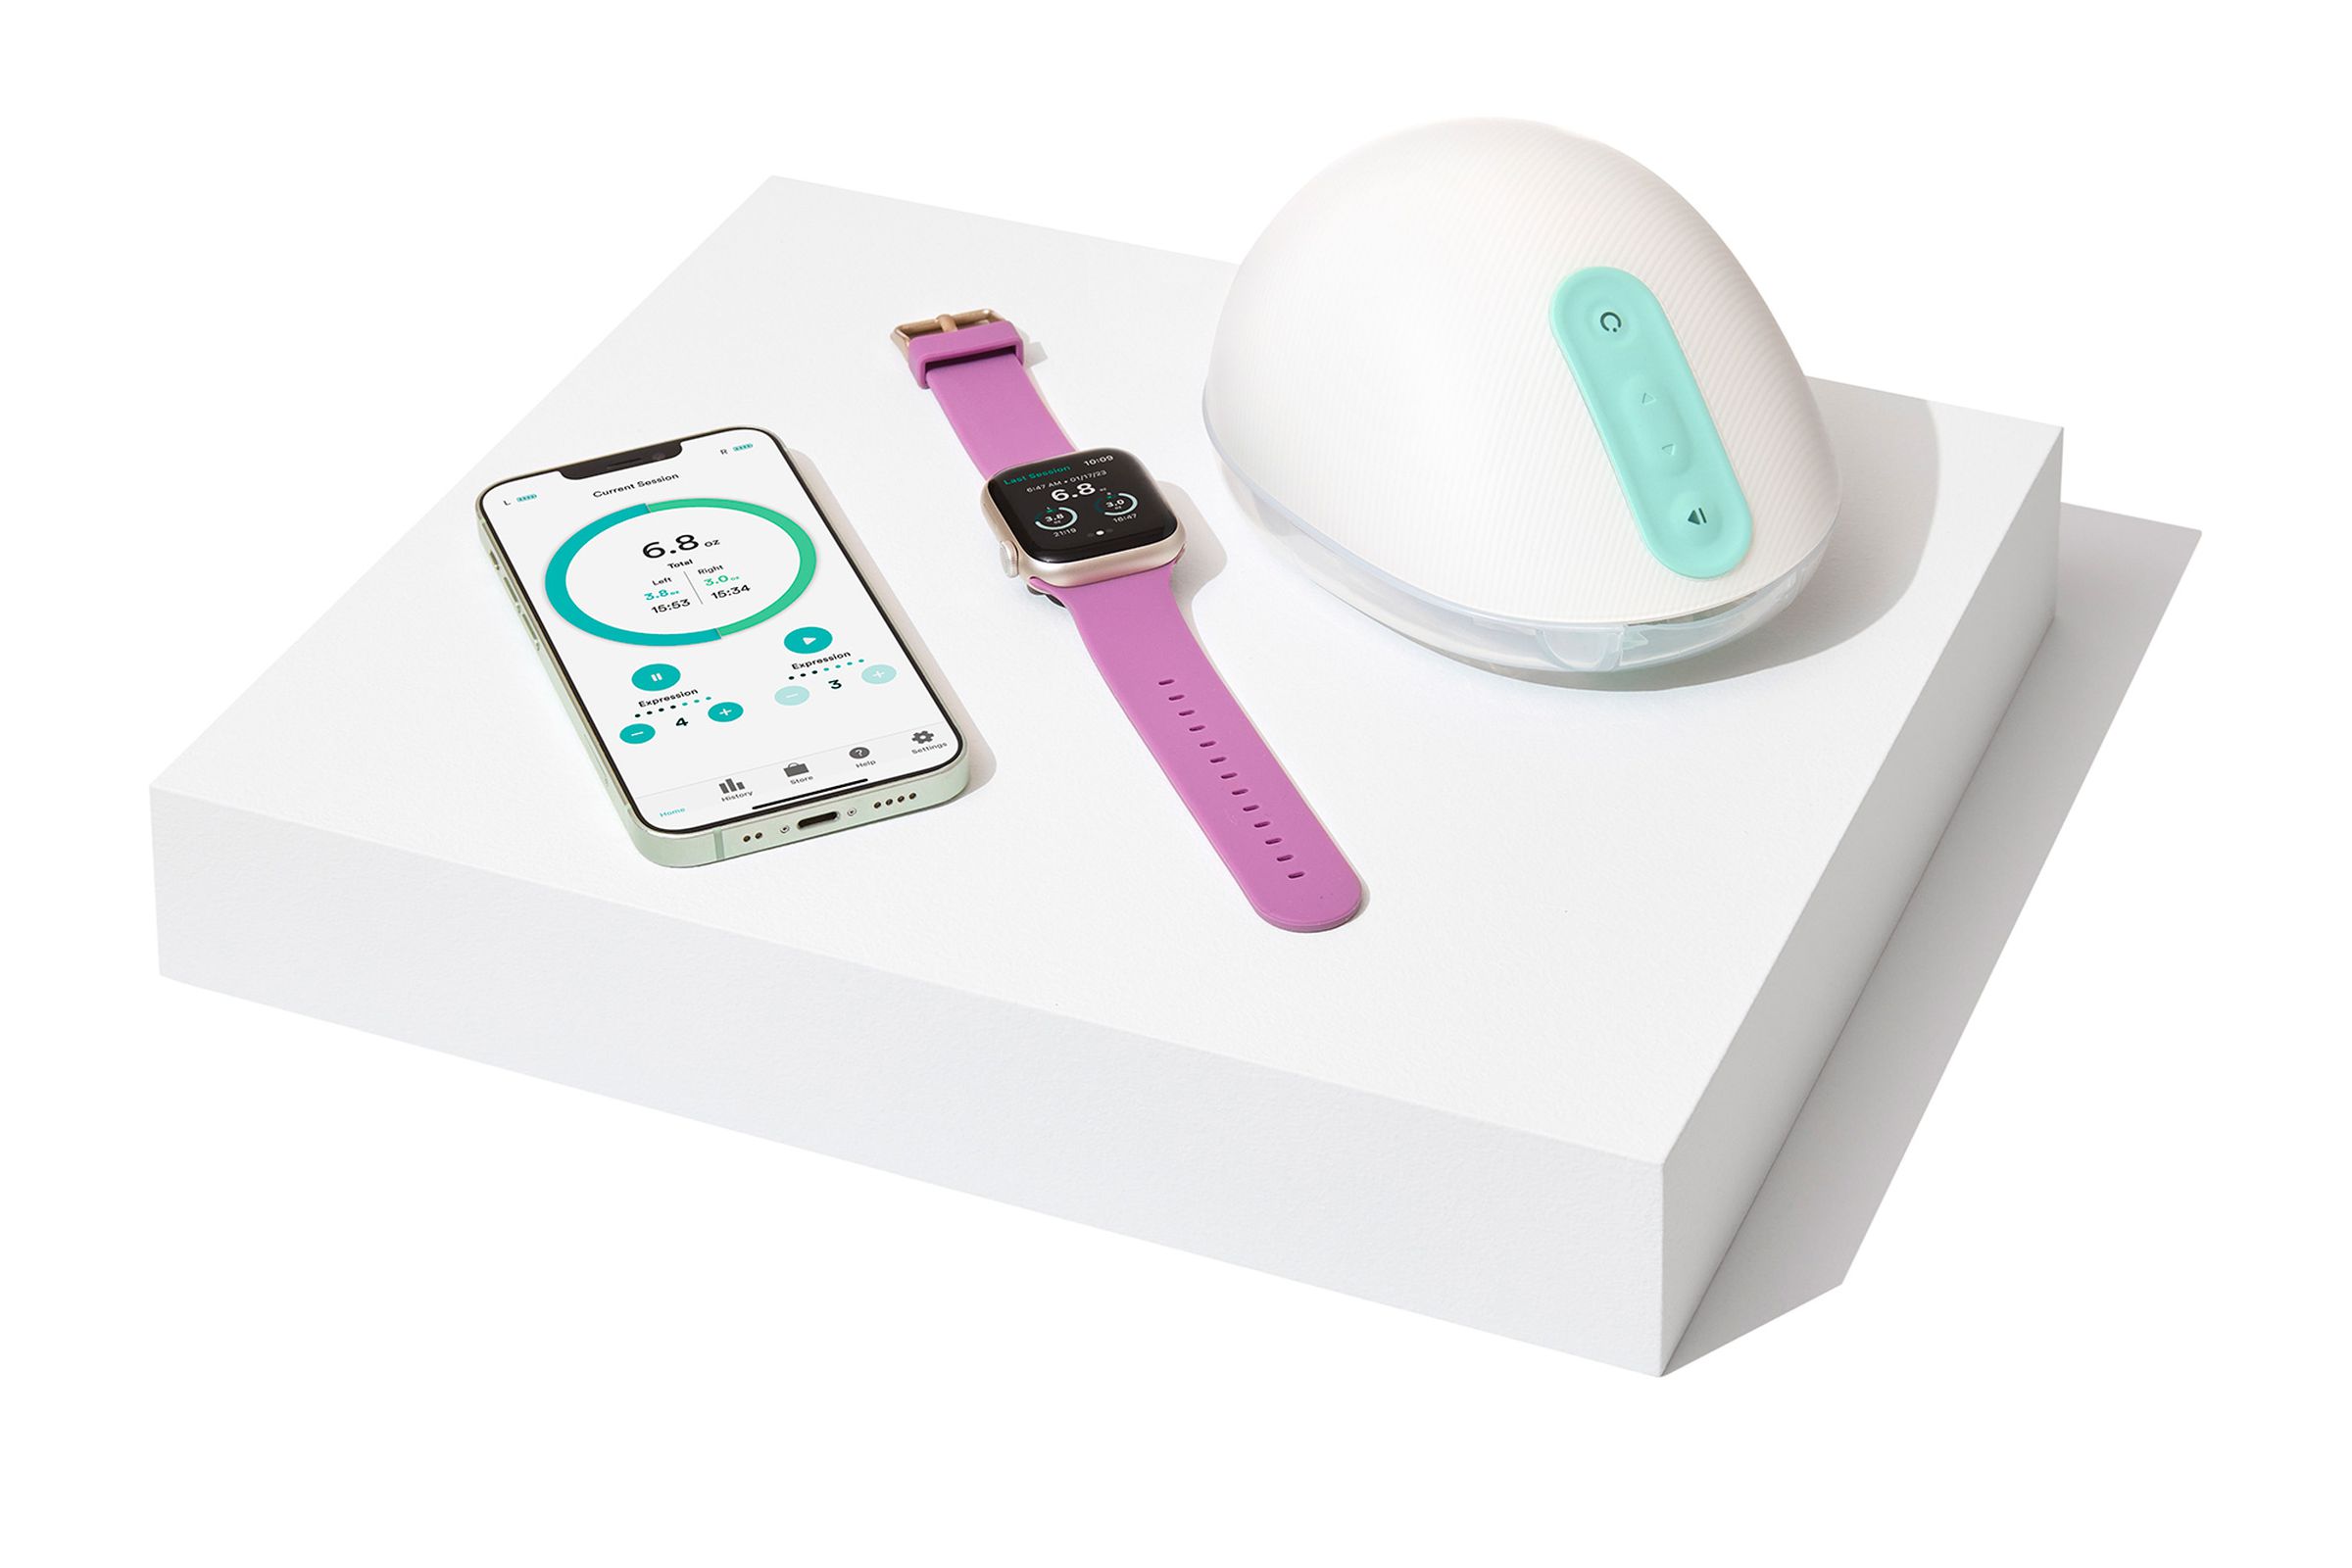 The Willow breast pump now has an Apple Watch app to make pumping slightly less terrible